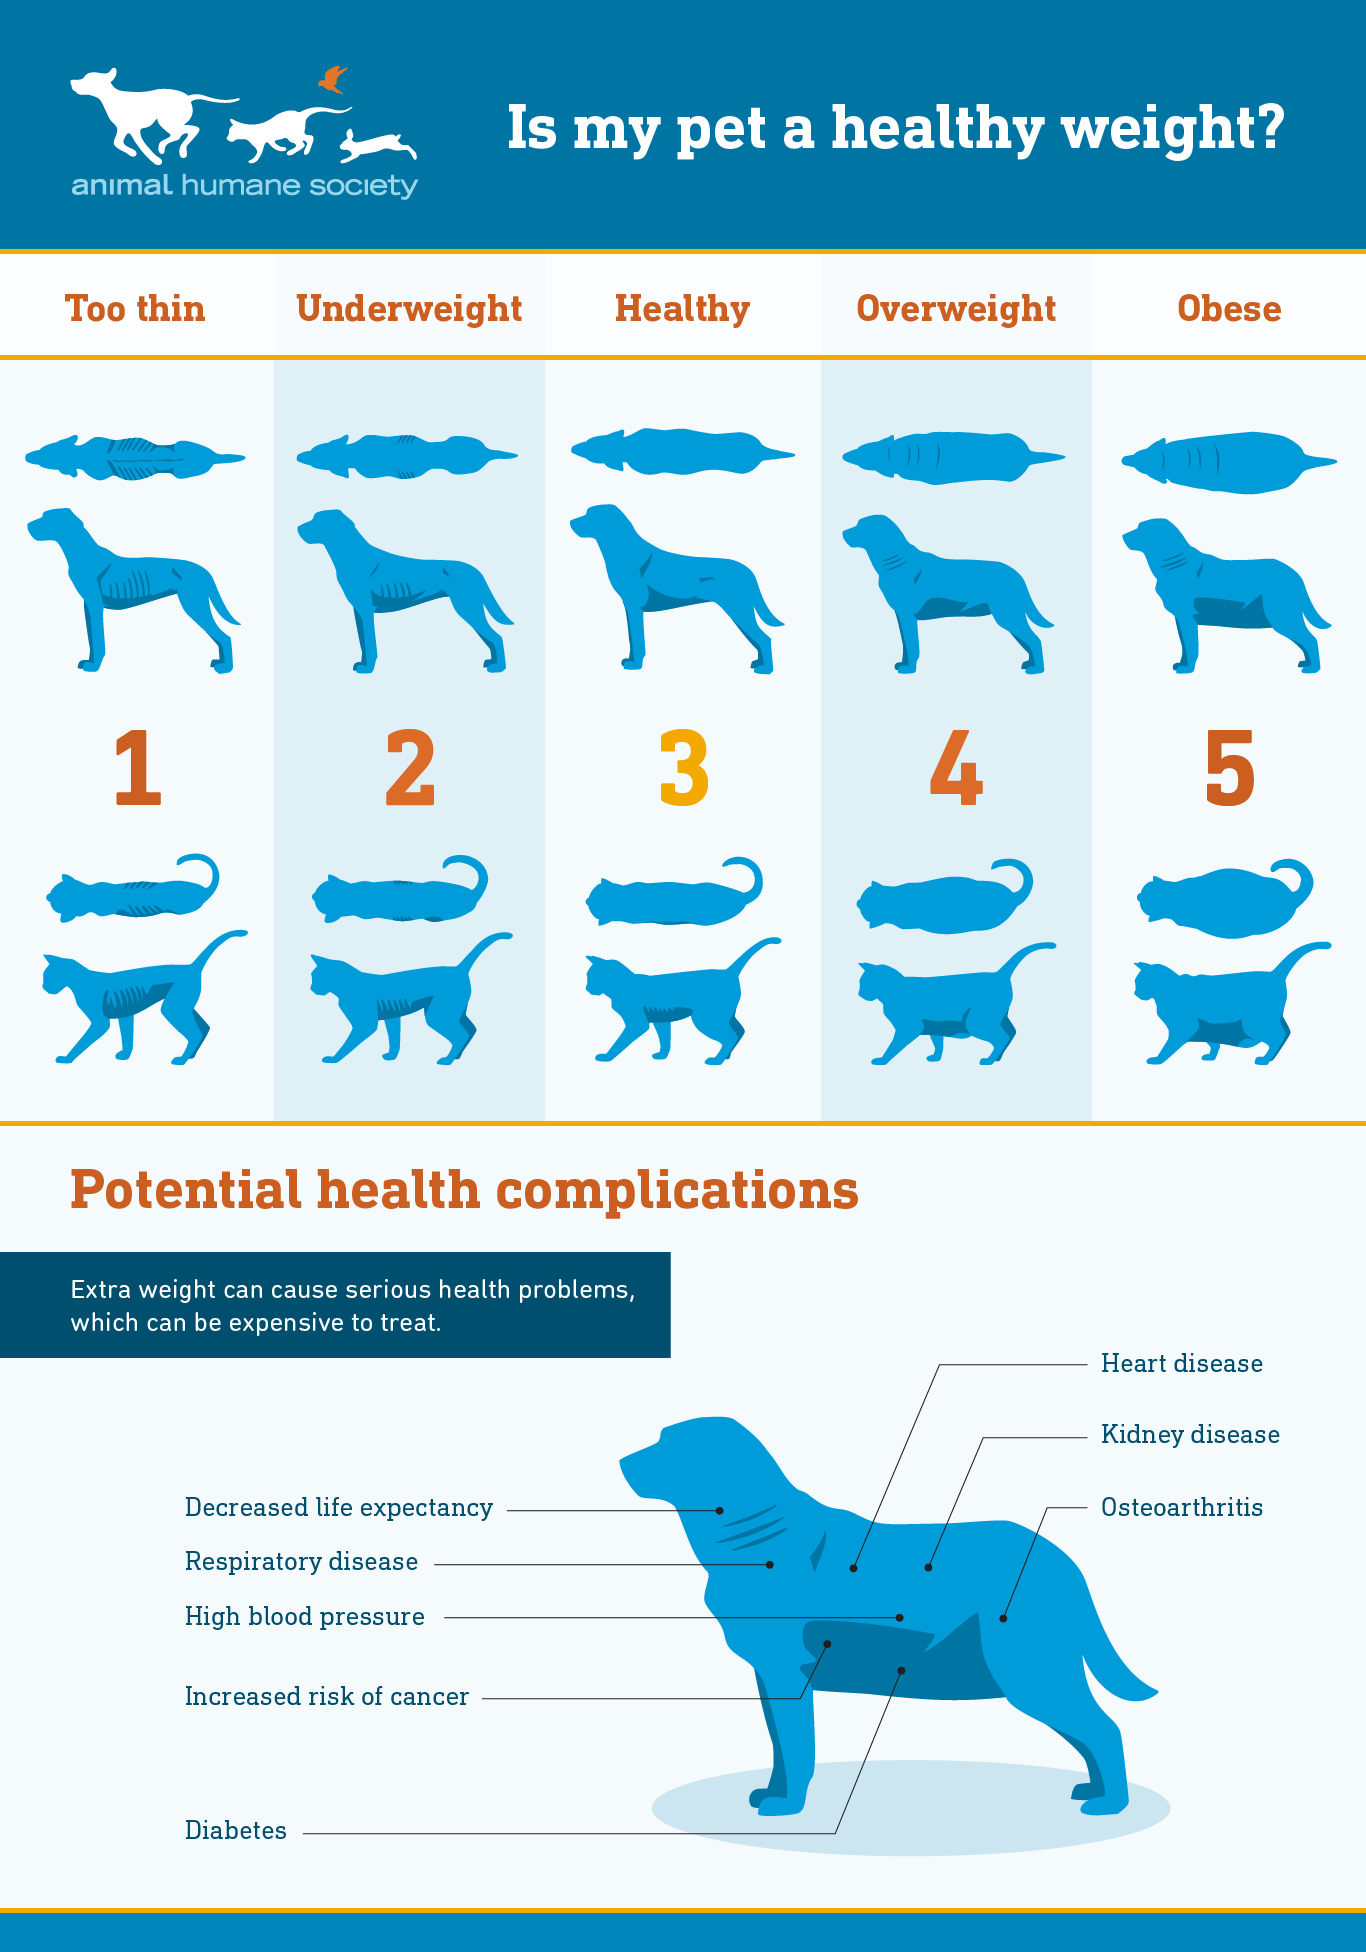 https://www.animalhumanesociety.org/sites/default/files/media/image/2019-01/Overweight-Pet-Graphic.png